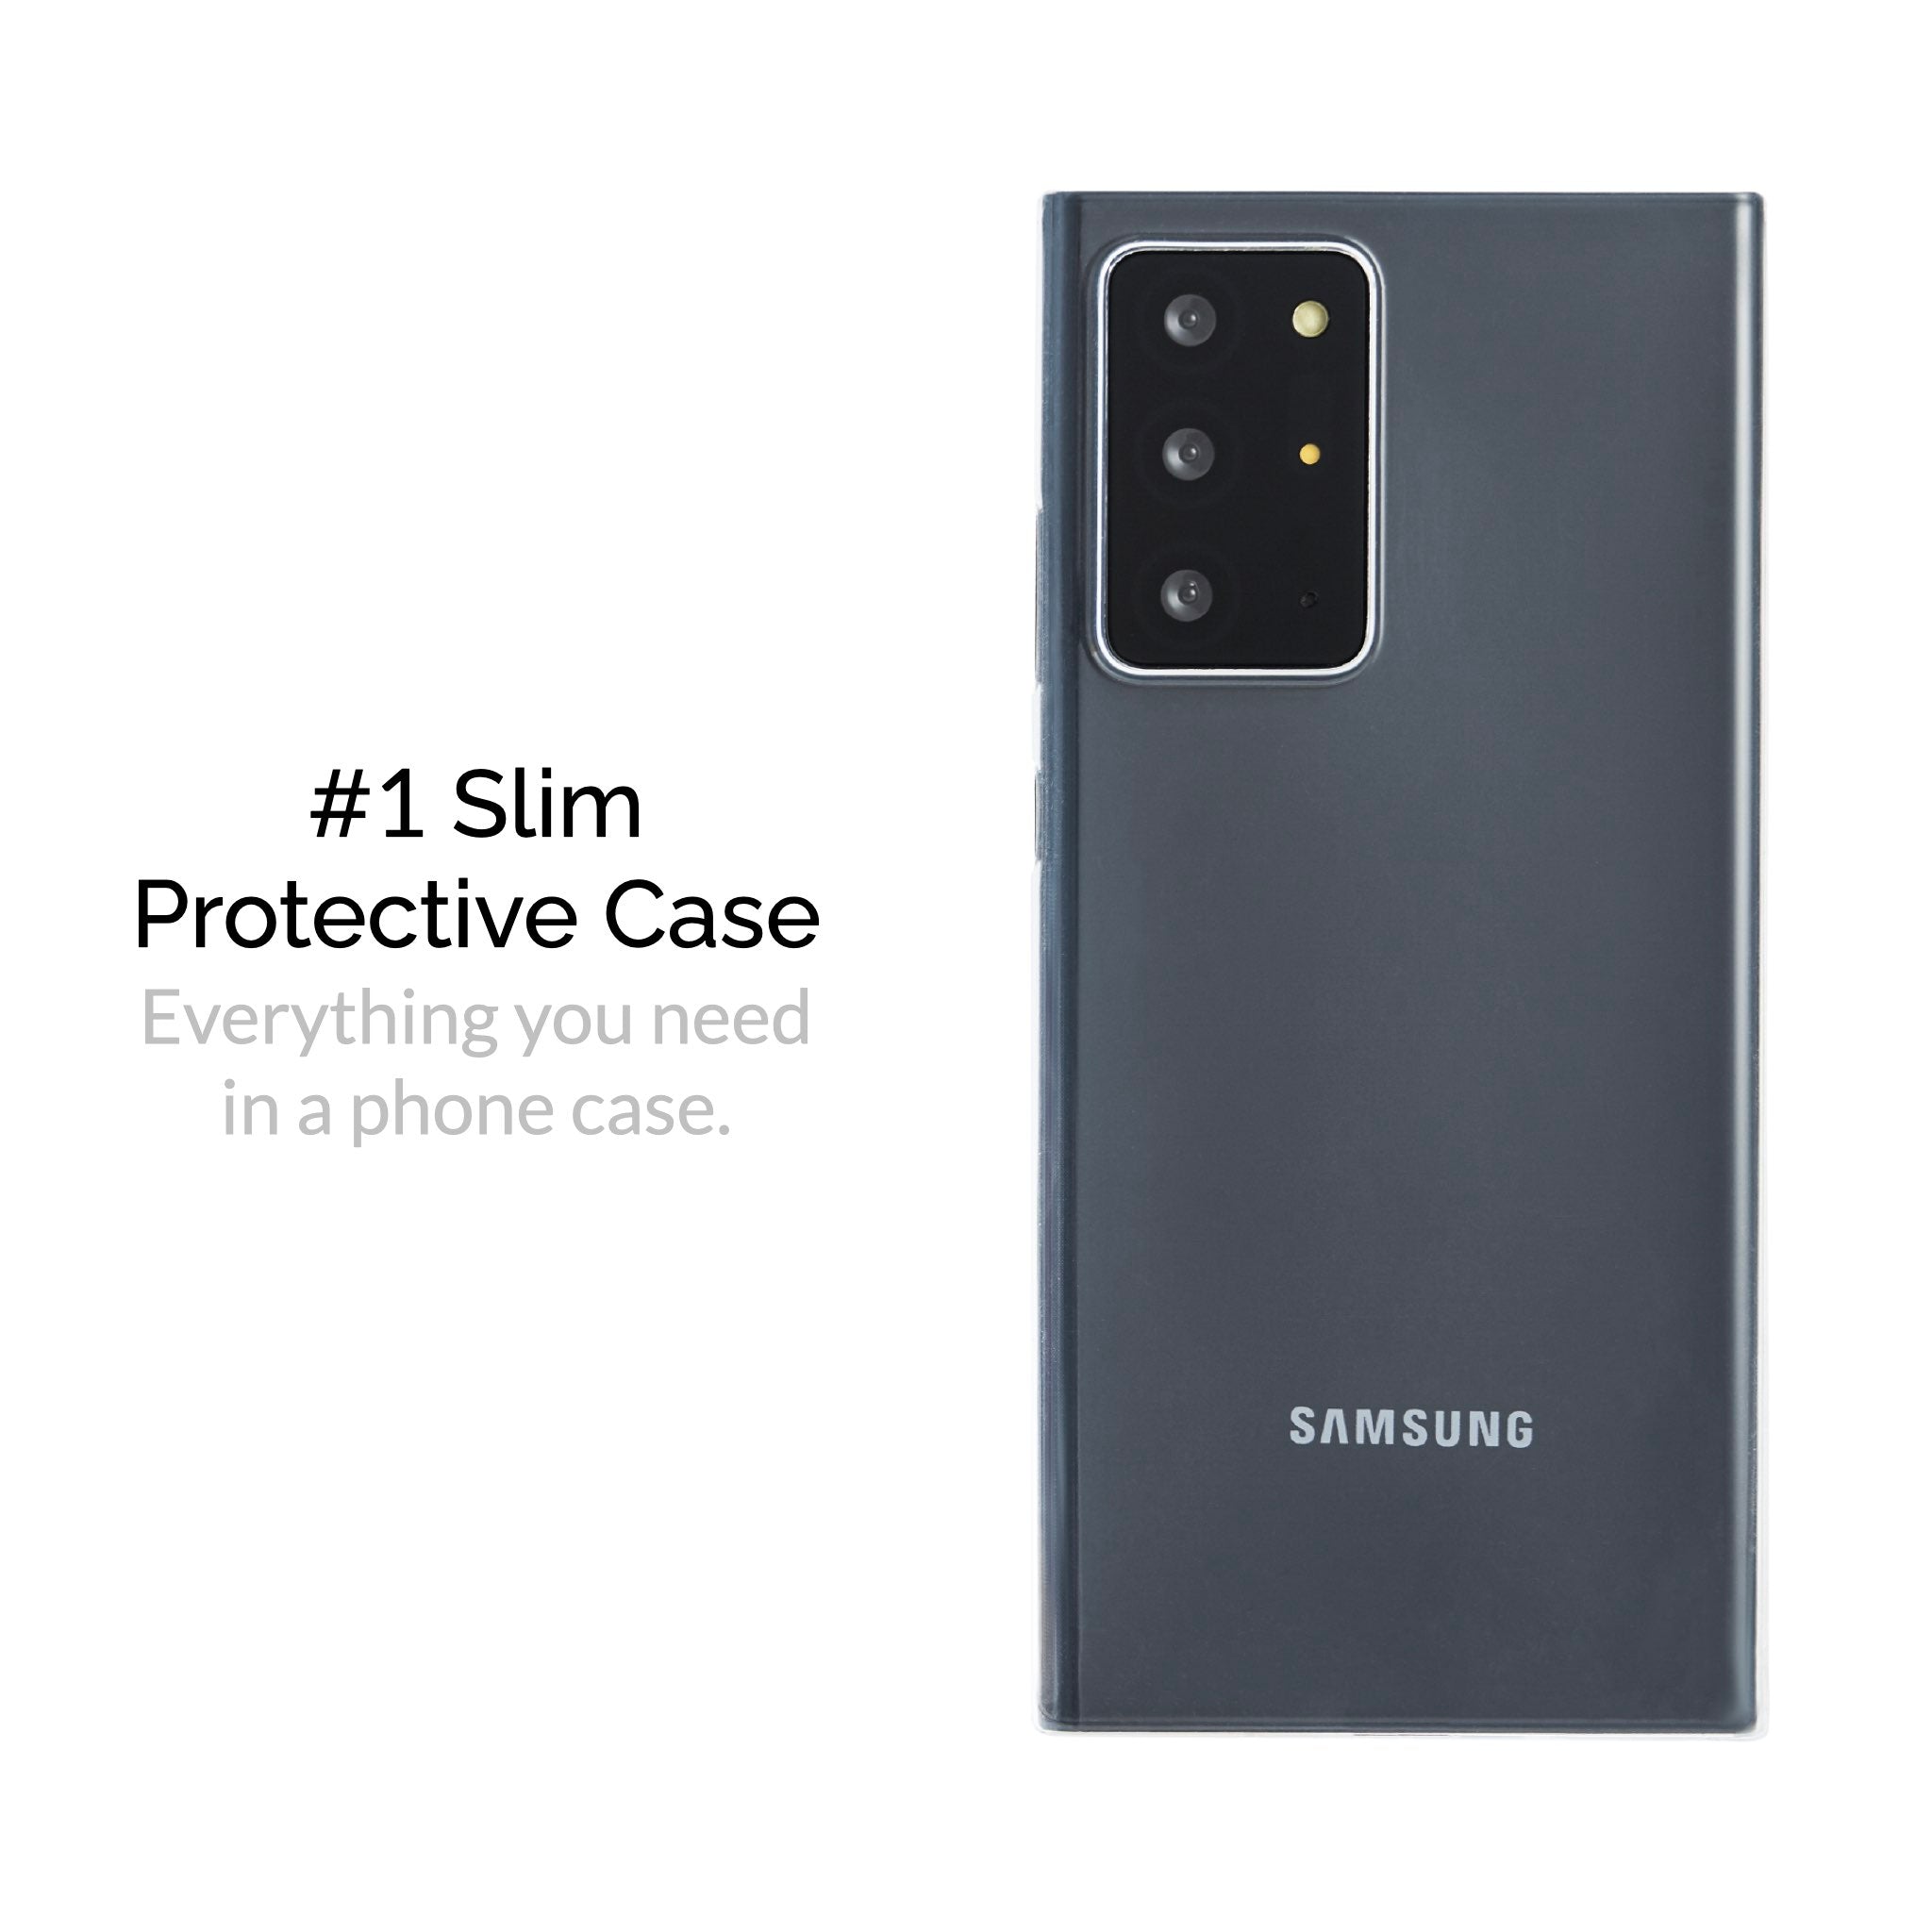 galaxy note 20 series cases, note 20 cases, samsung galaxy note 20 cases, slimcase galaxy note 20 cases